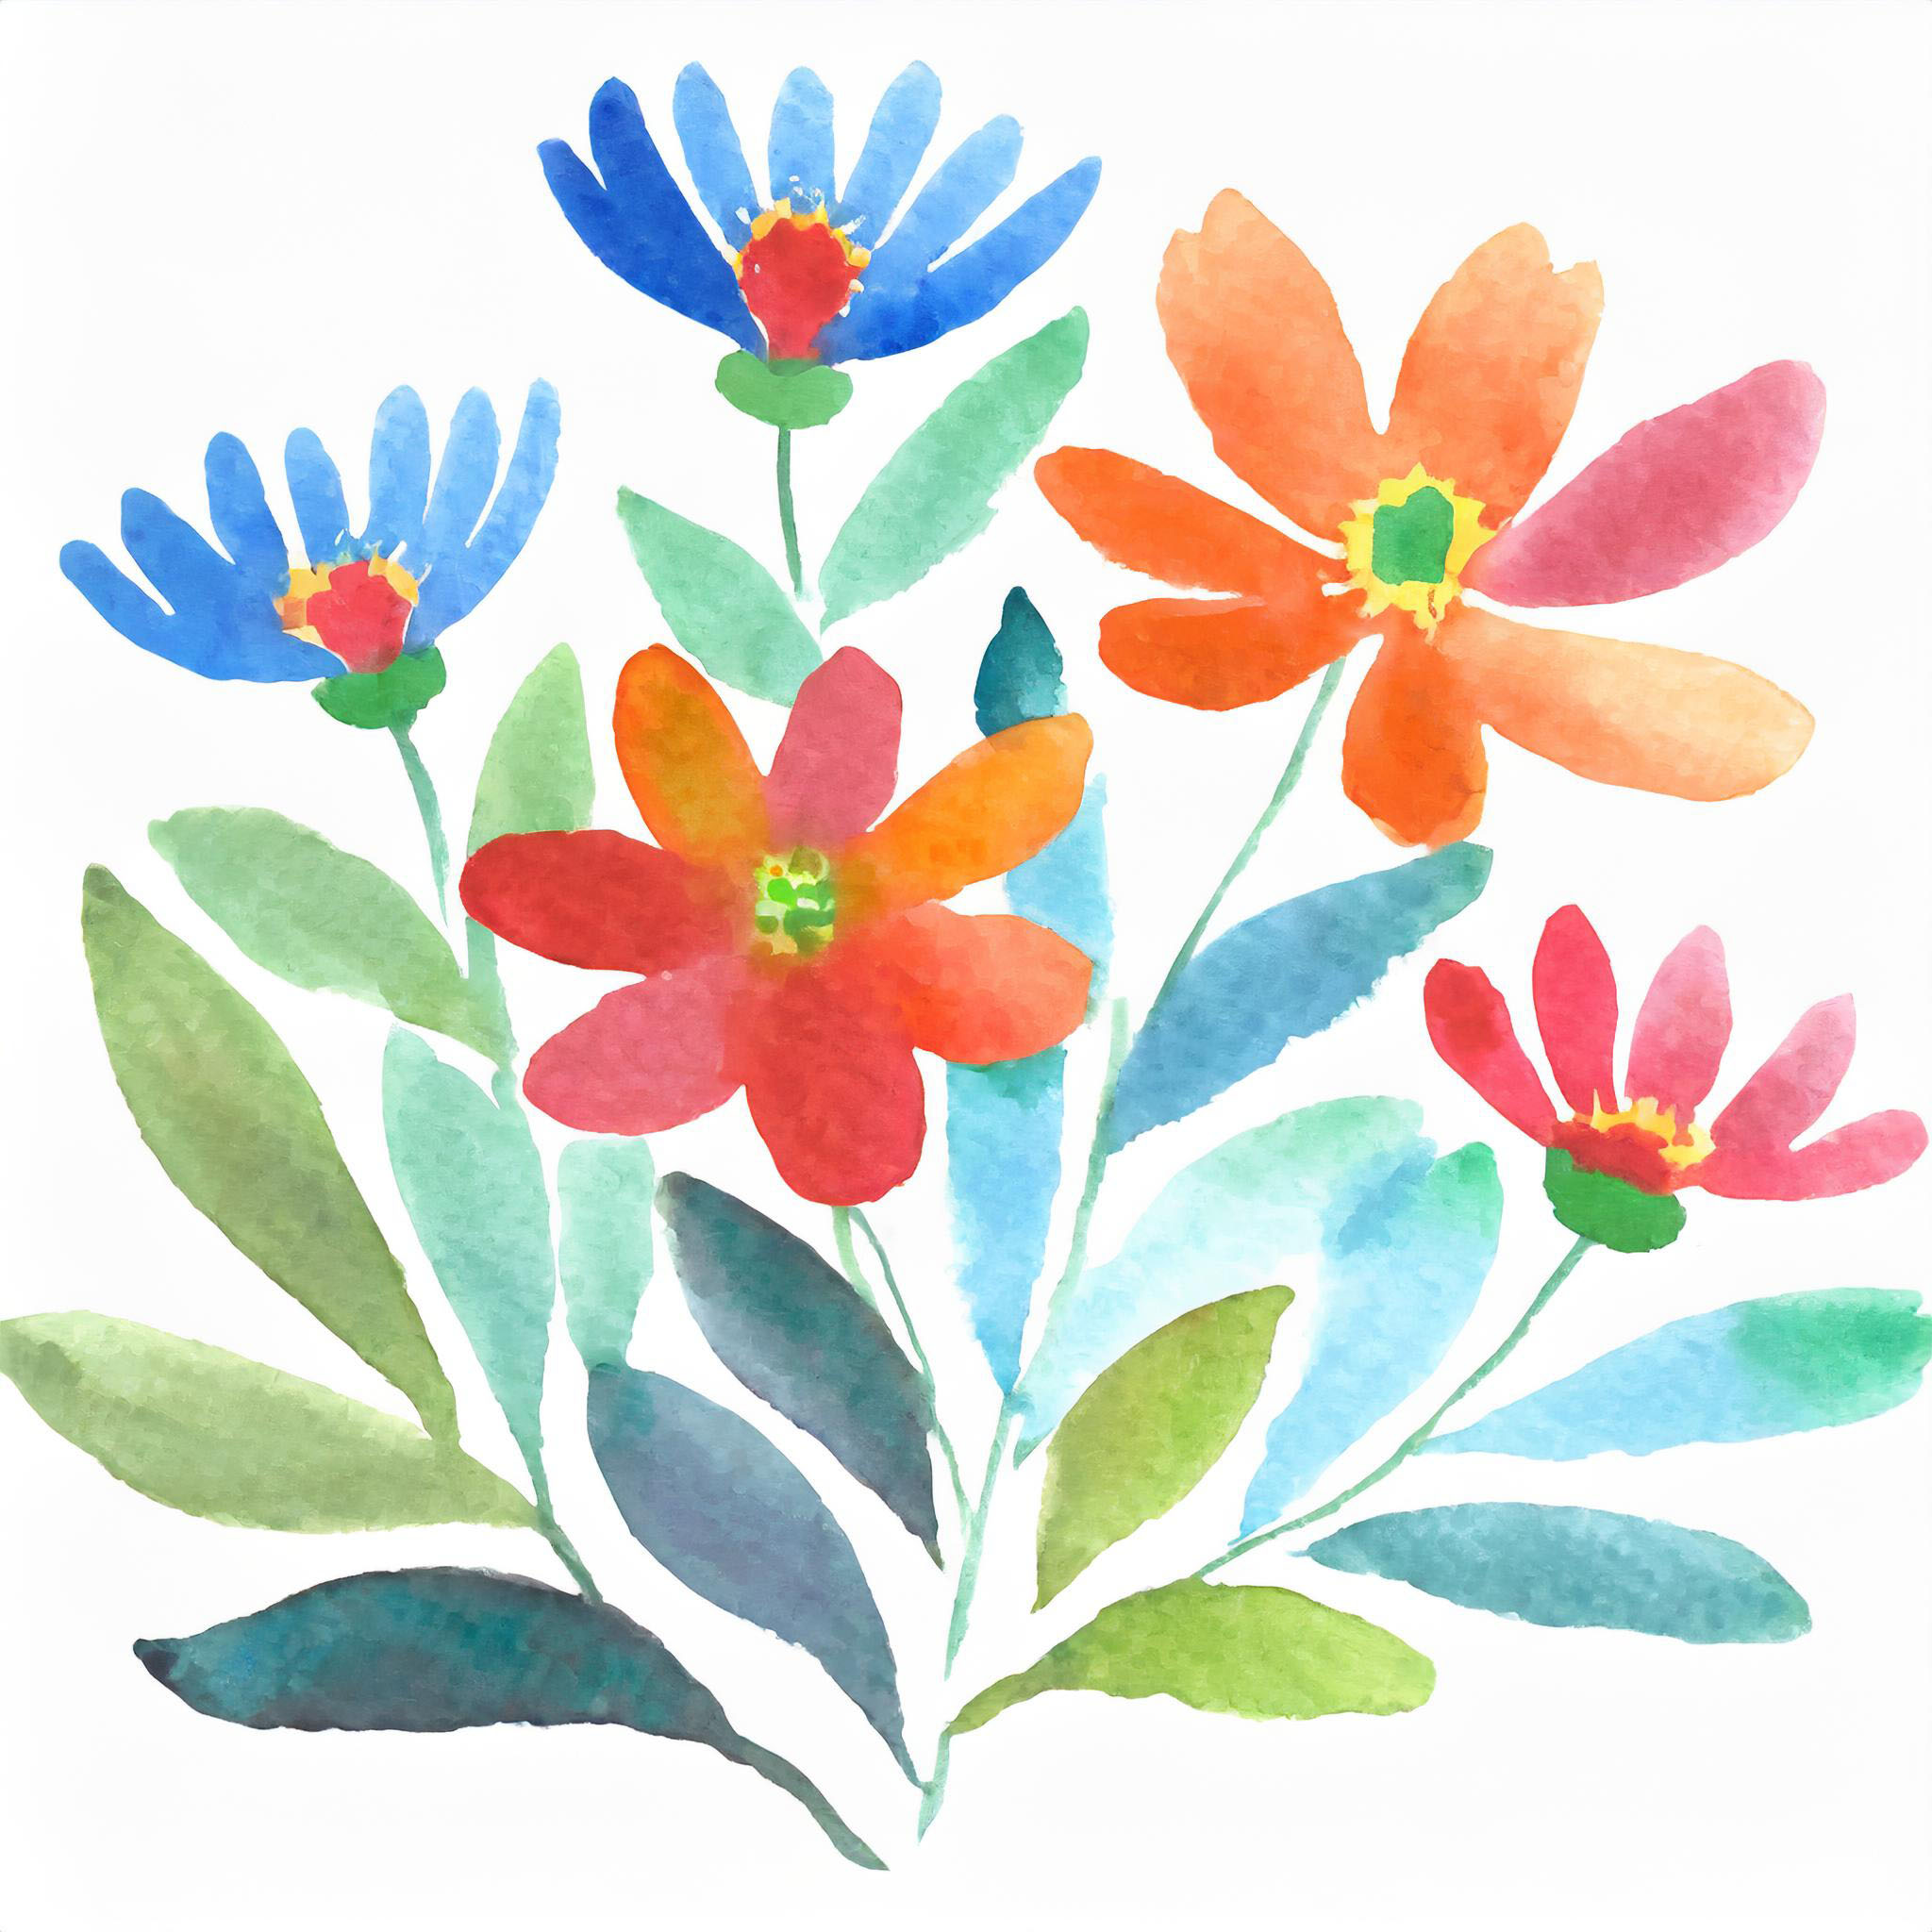 Loose Floral Watercolor Painting Process and Tips for Abstracts